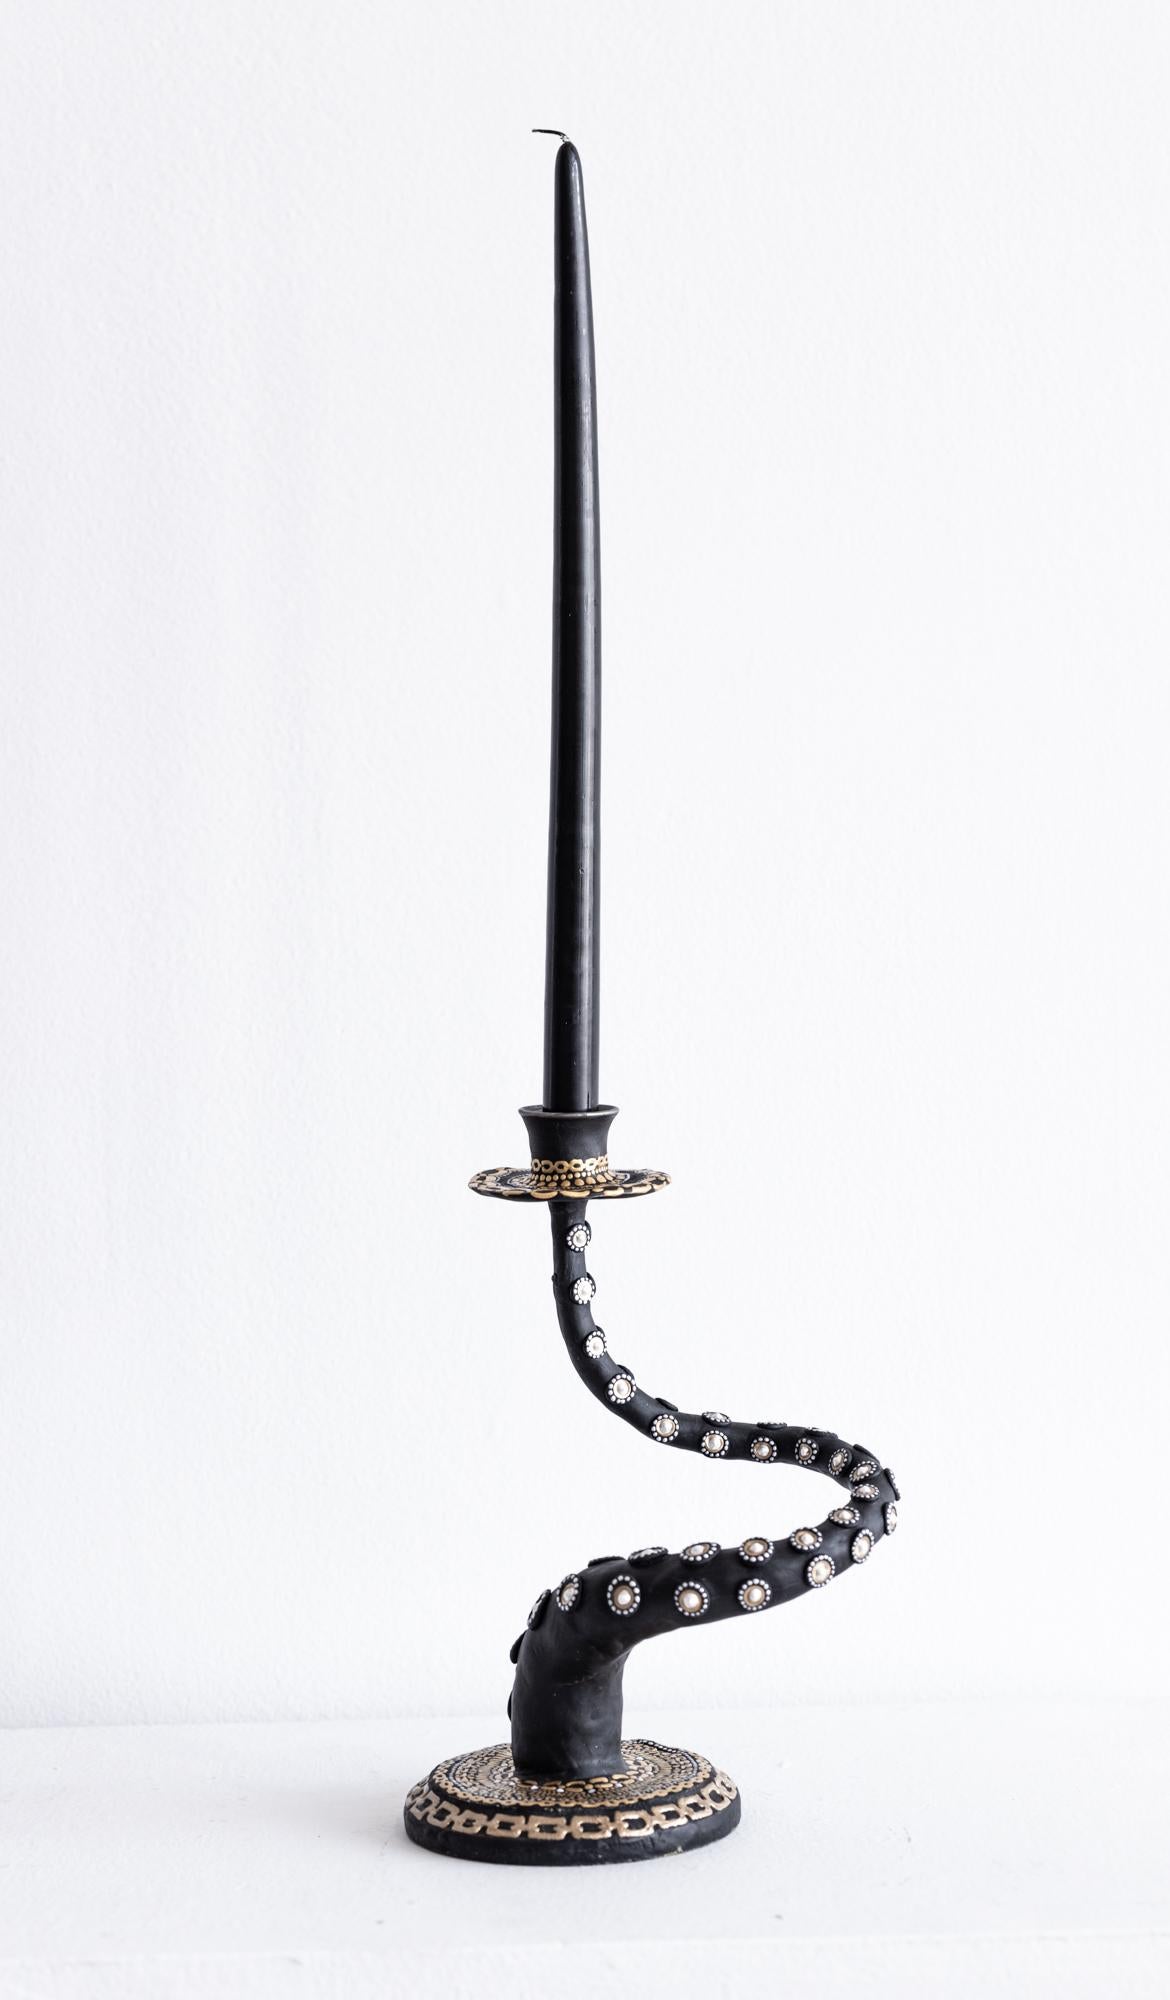 "Chanel Tentacle Candelabra" Dimensional paint, epoxy clay, lamp parts - Sculpture by PJ Linden